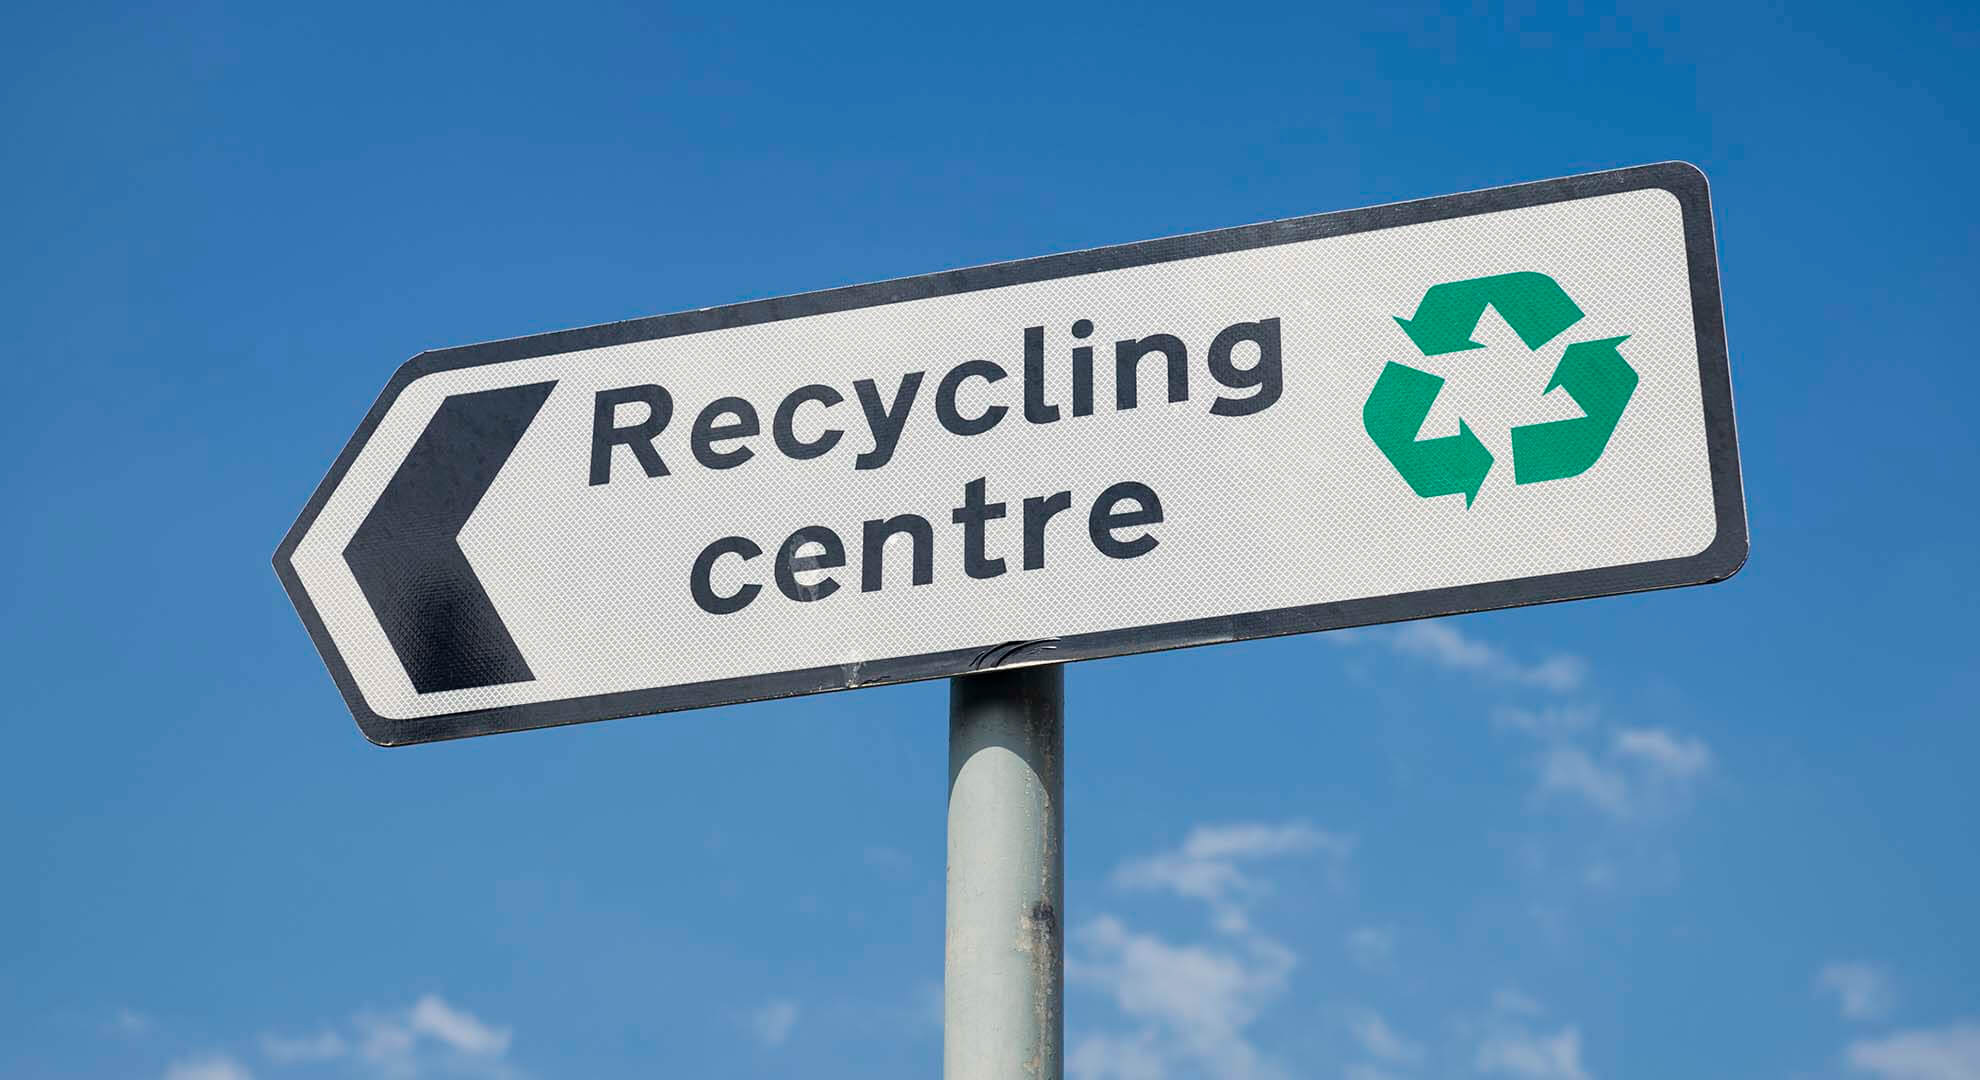 Recycling centre signpost